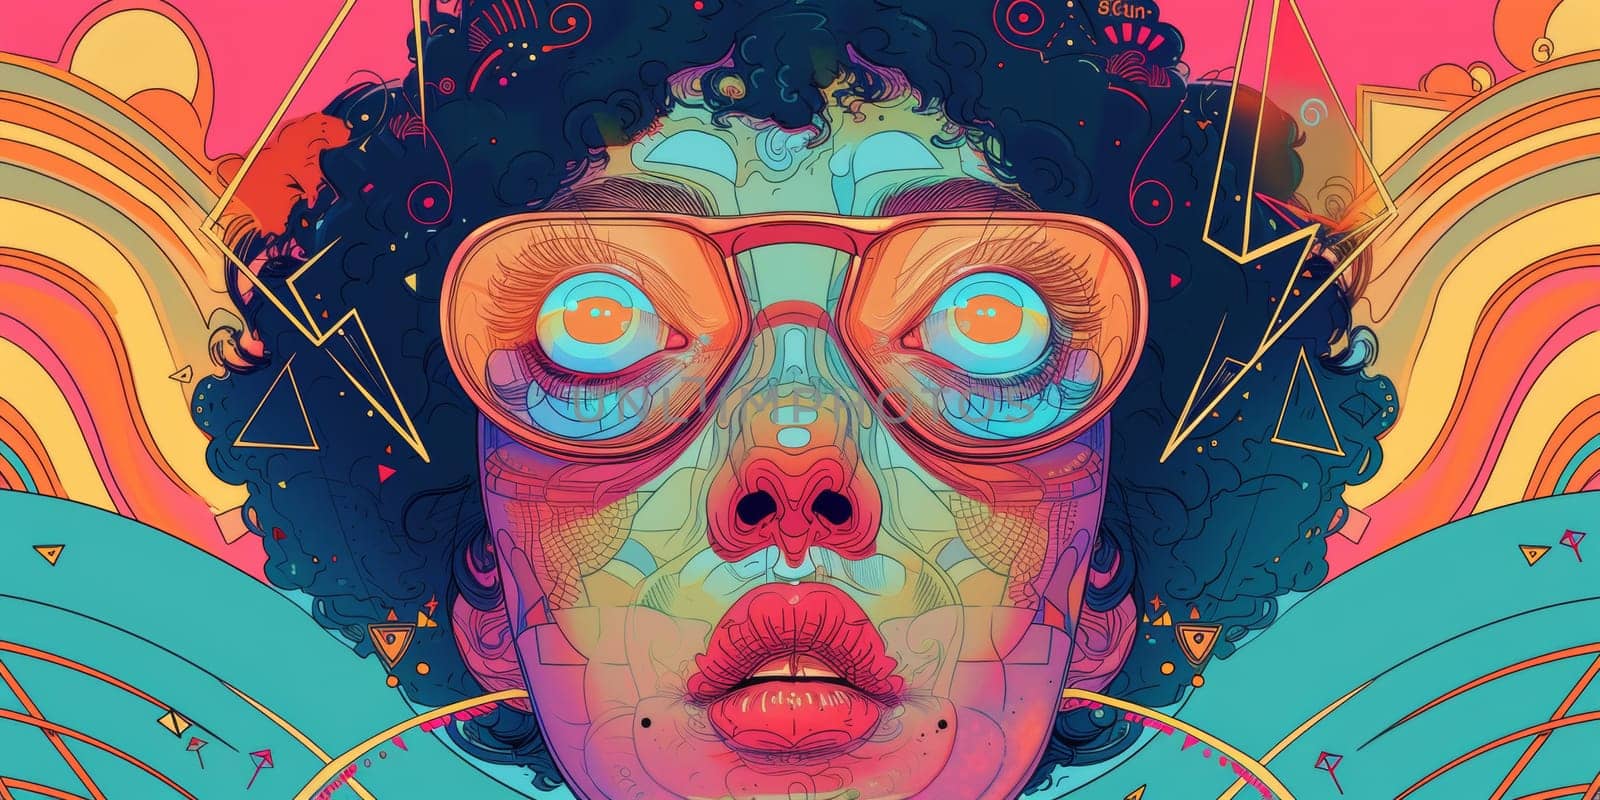 A colorful illustration of a woman with large glasses and curly hair, AI by starush